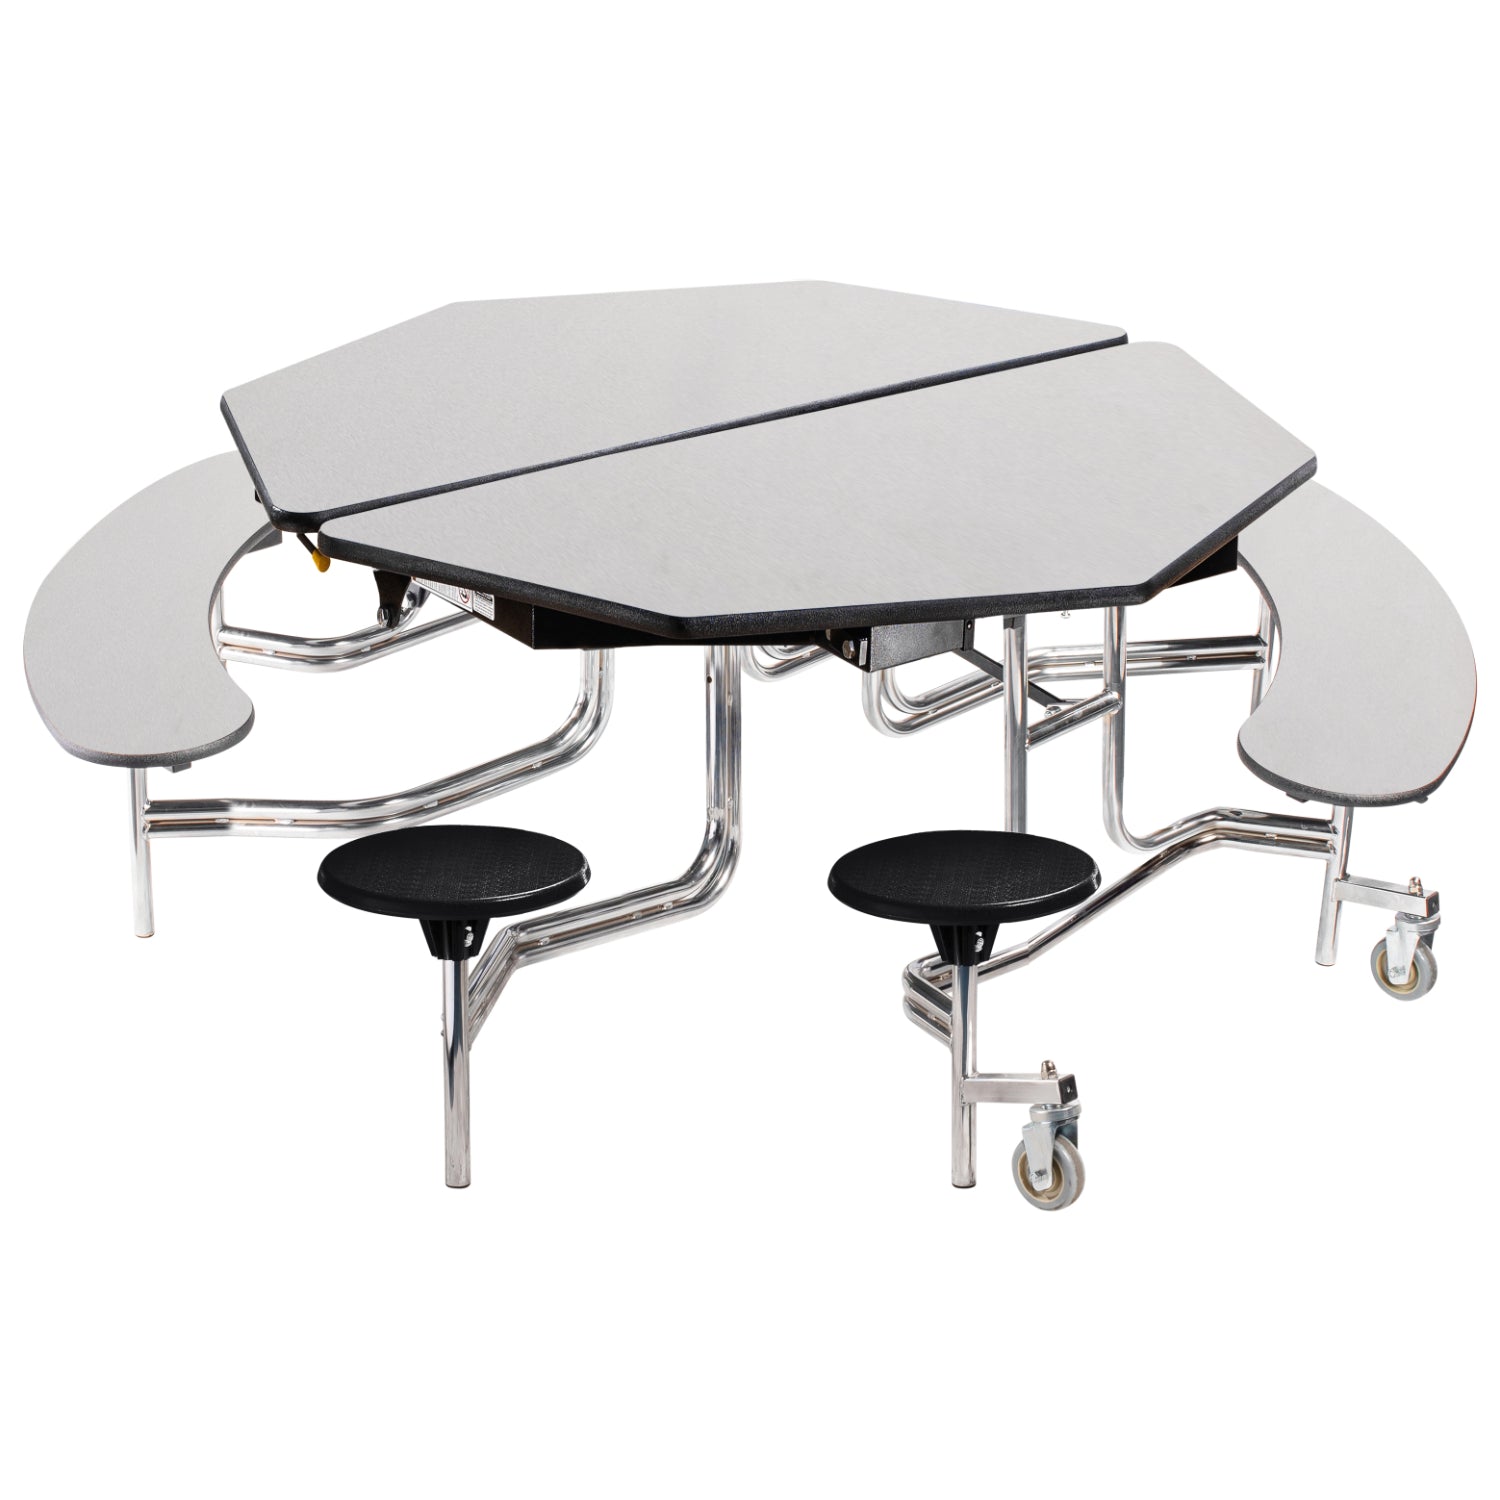 Mobile Combo Cafeteria Table, 60" Octagon with Stools and Benches, MDF Core, Black ProtectEdge, Chrome Frame